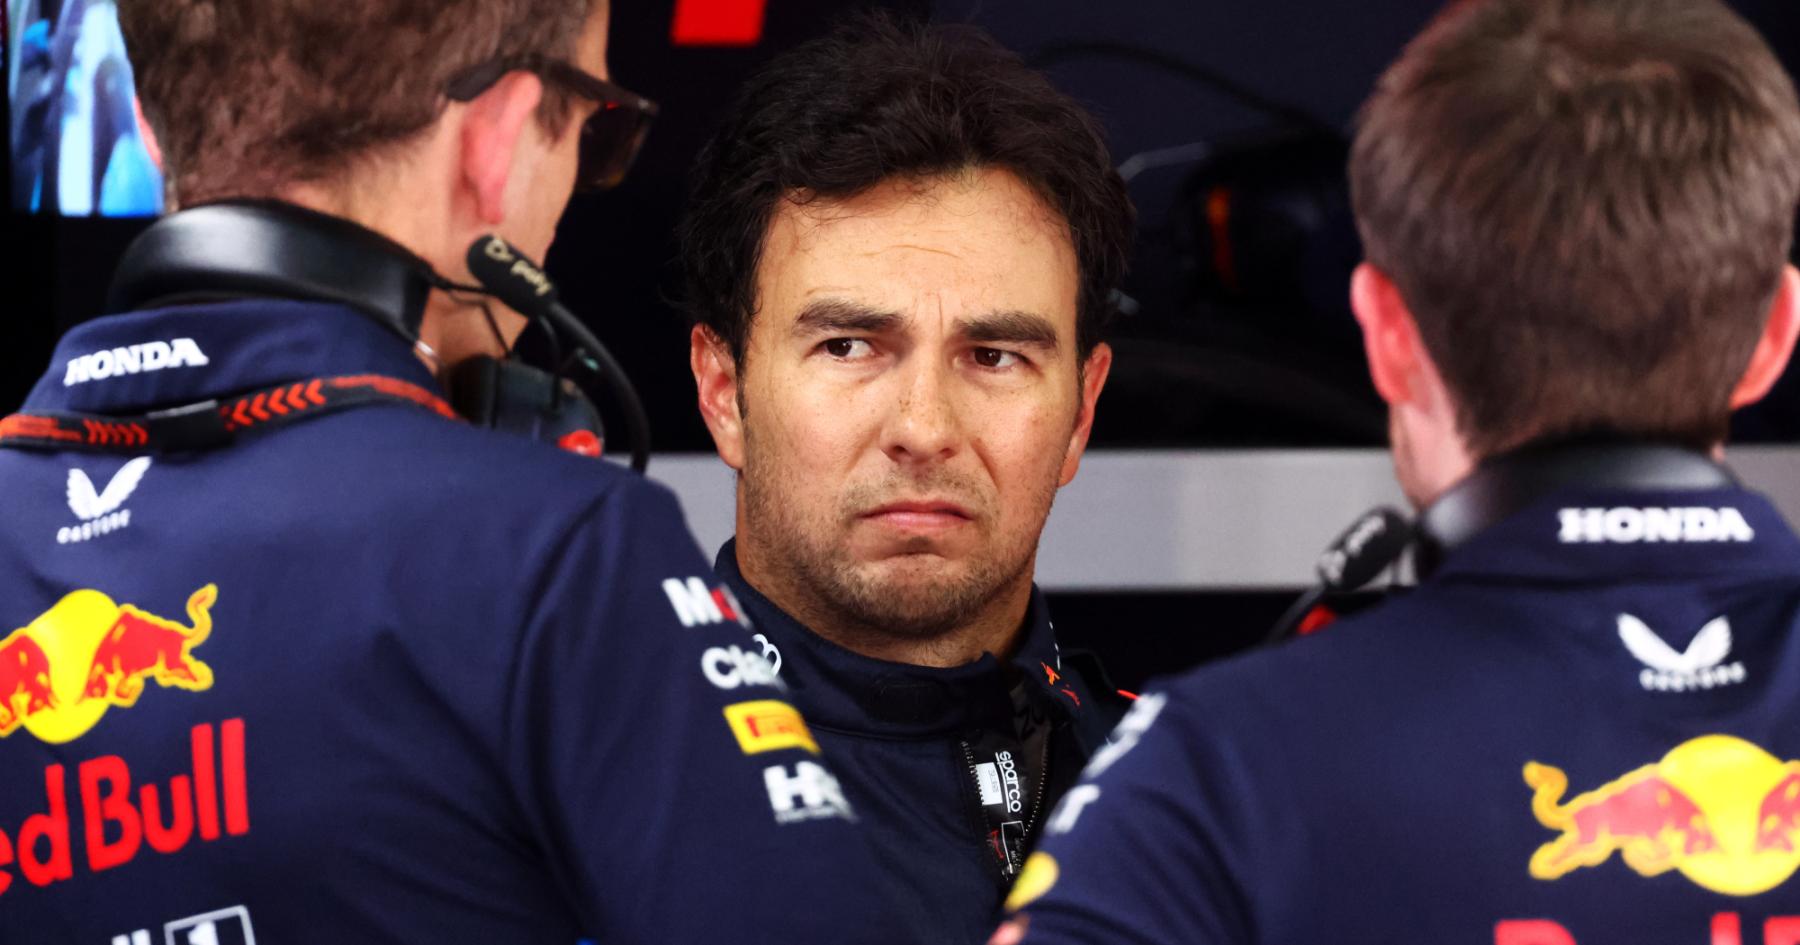 The Inside Scoop: Perez Delves into the Challenges Faced by Red Bull Drivers